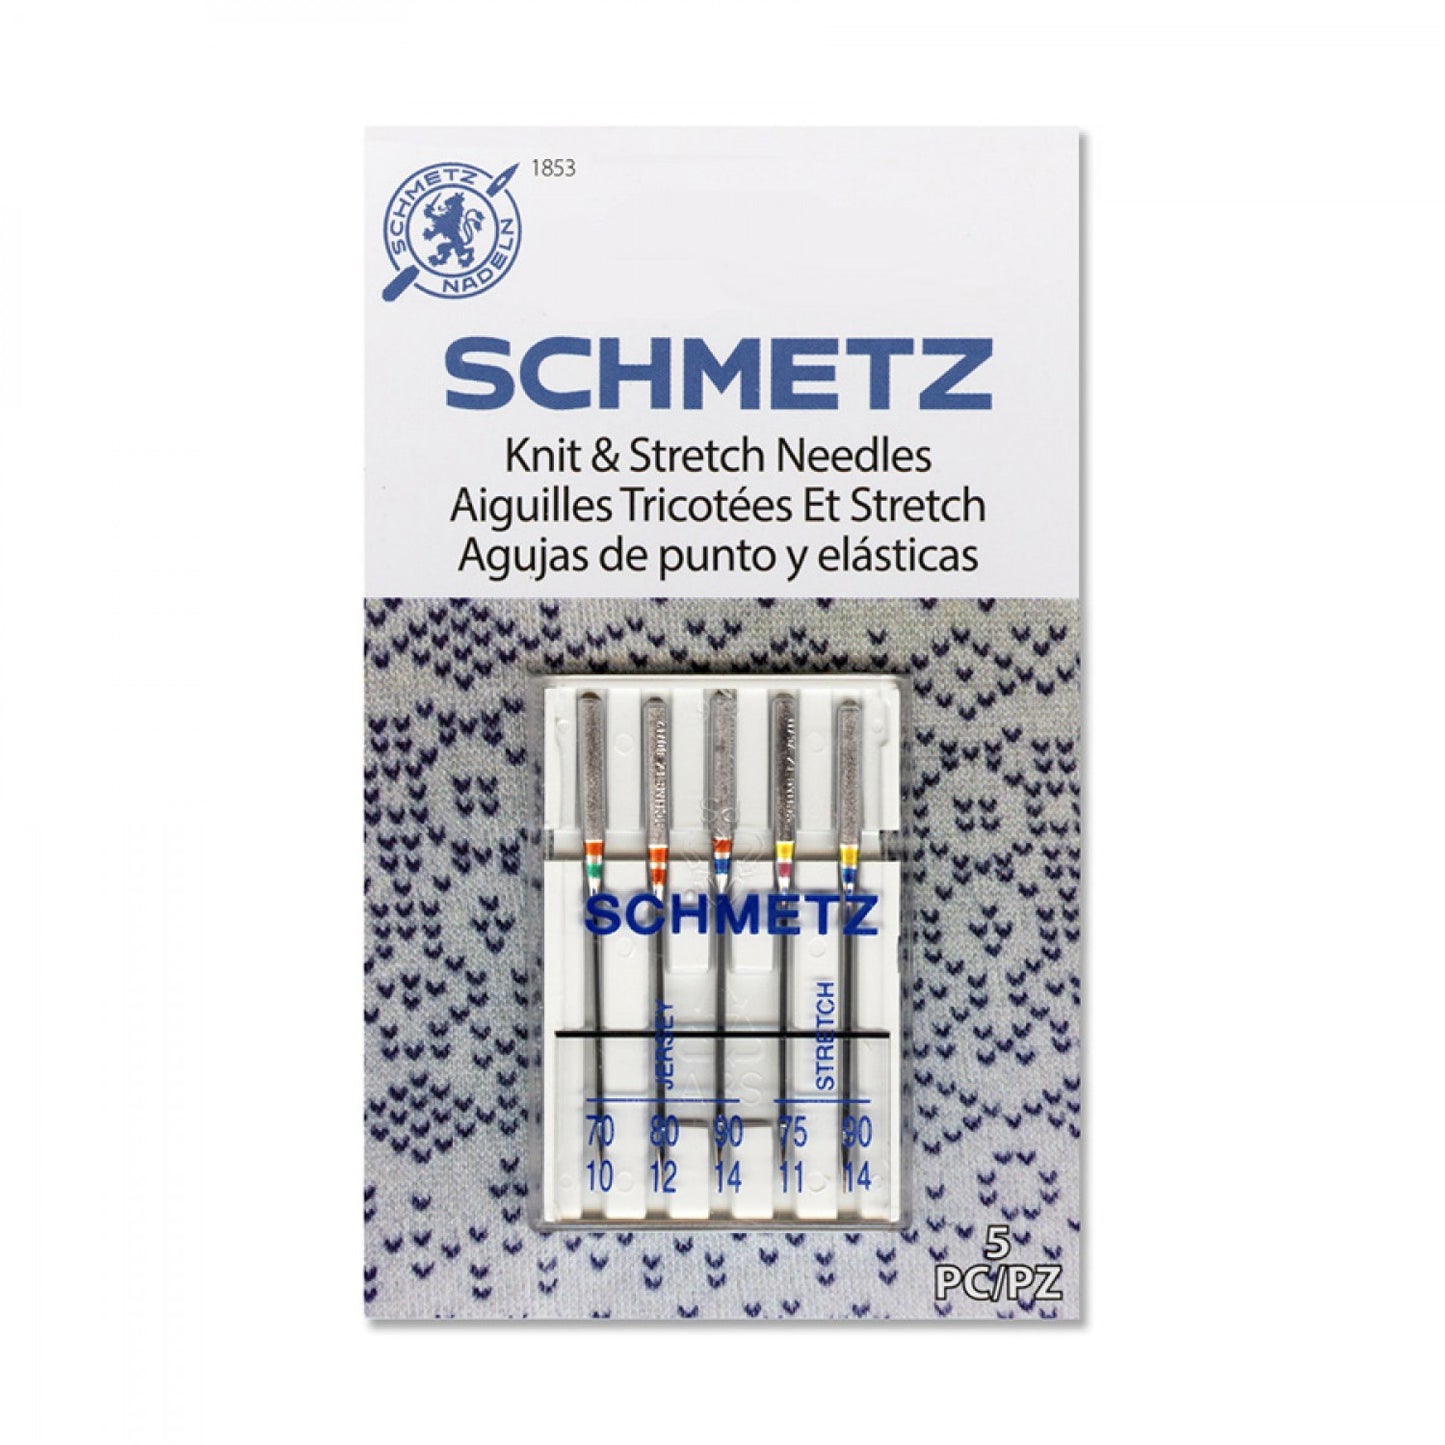 Schmetz #1853 Knit & Stretch Needles Carded - Assorted Size - 70/10, 80/12, 90/14 - 5 count